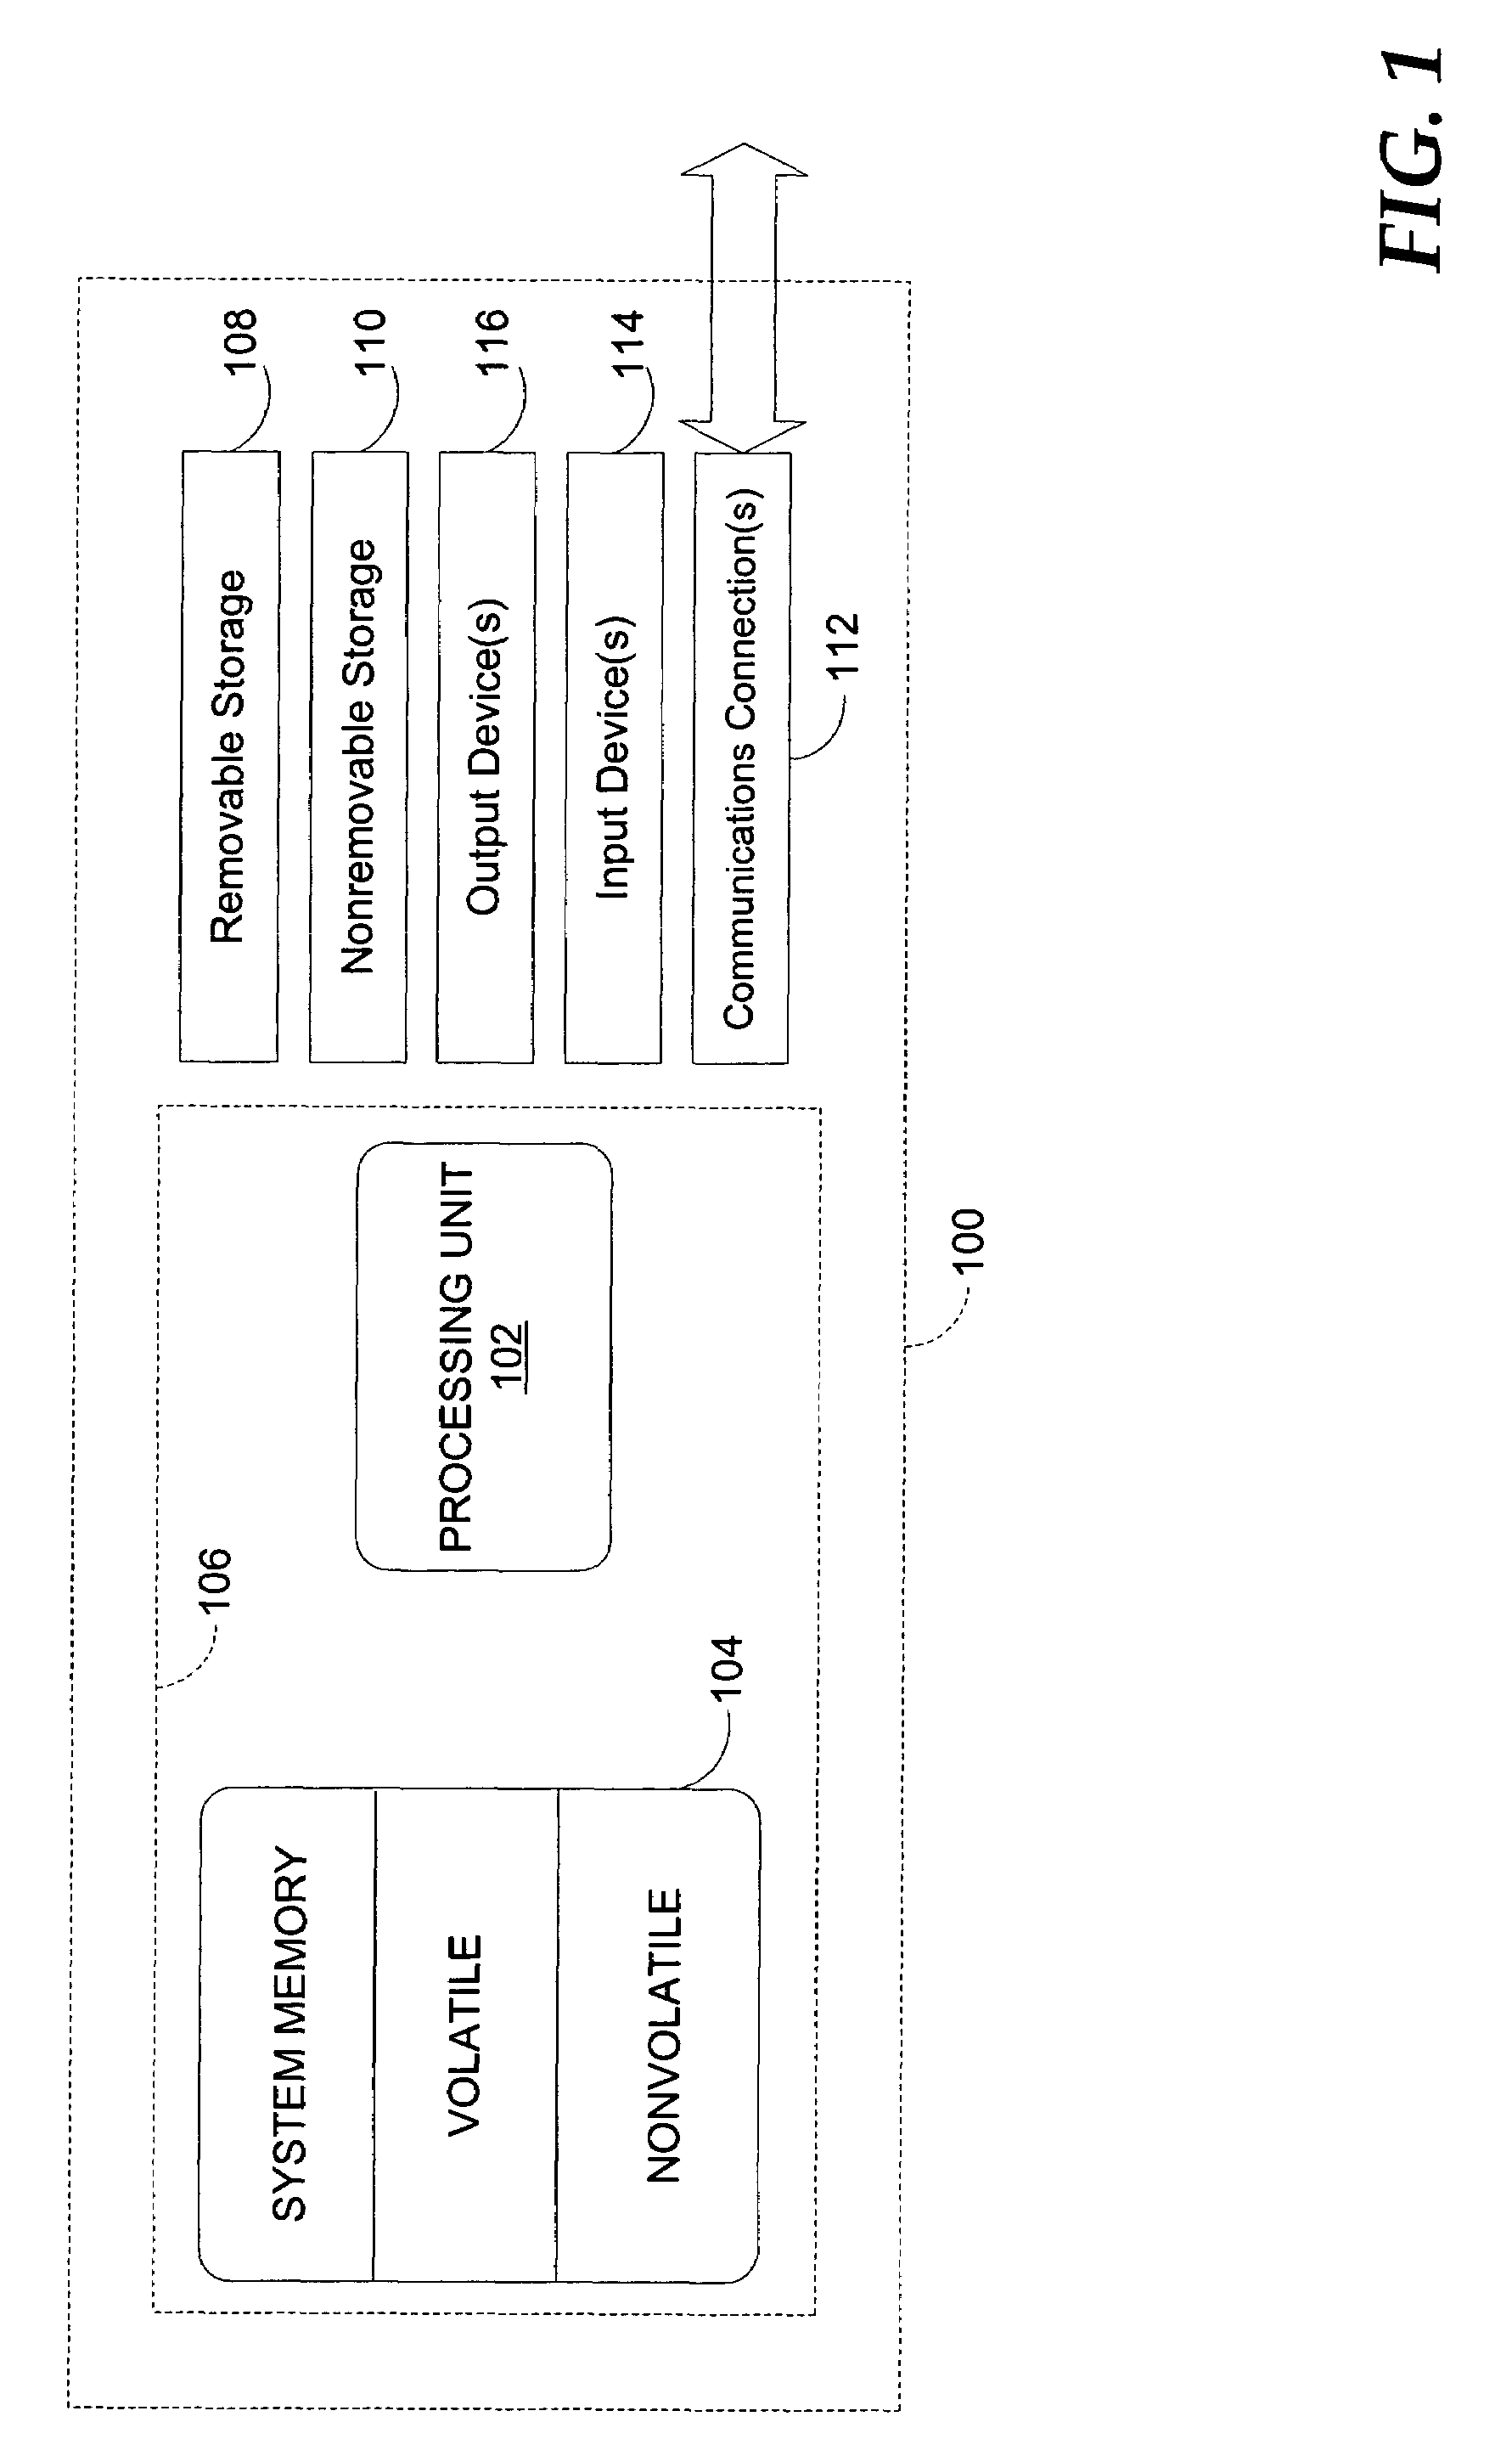 Method and system for representing hierarchal structures of a user-interface